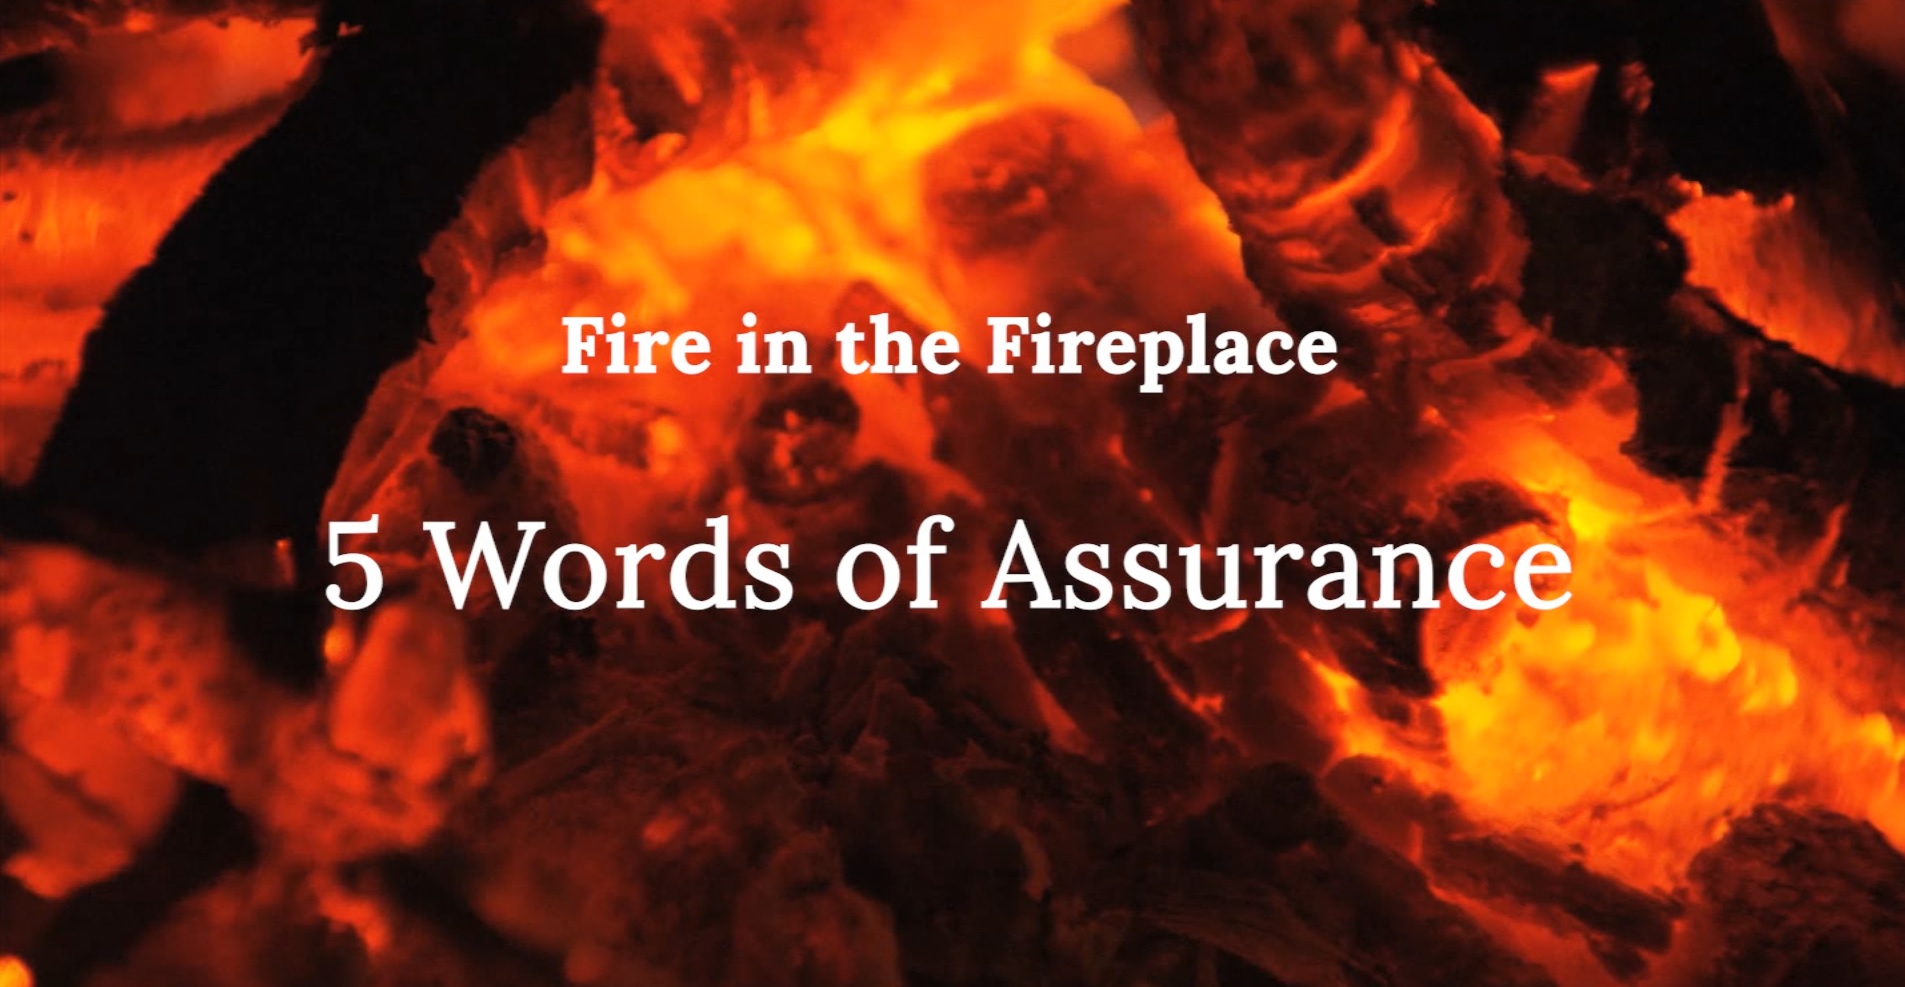 Fire in the Fireplace: 5 Words of Assurance